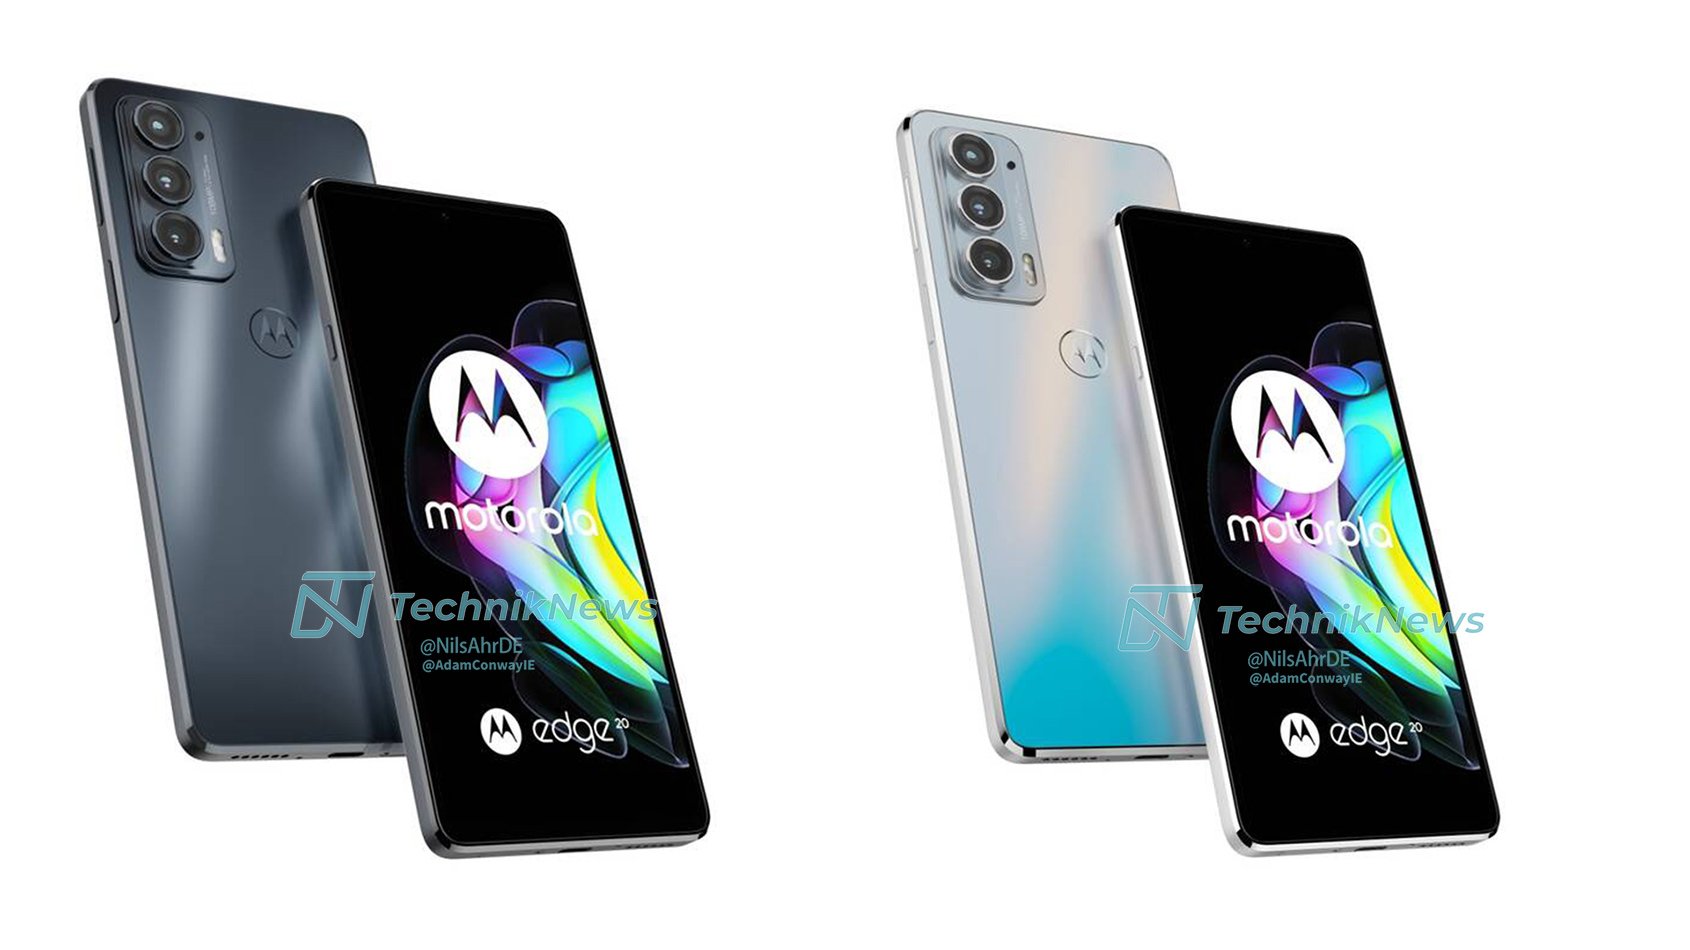 Leaked renders showing the Motorola Edge 20 from front and back